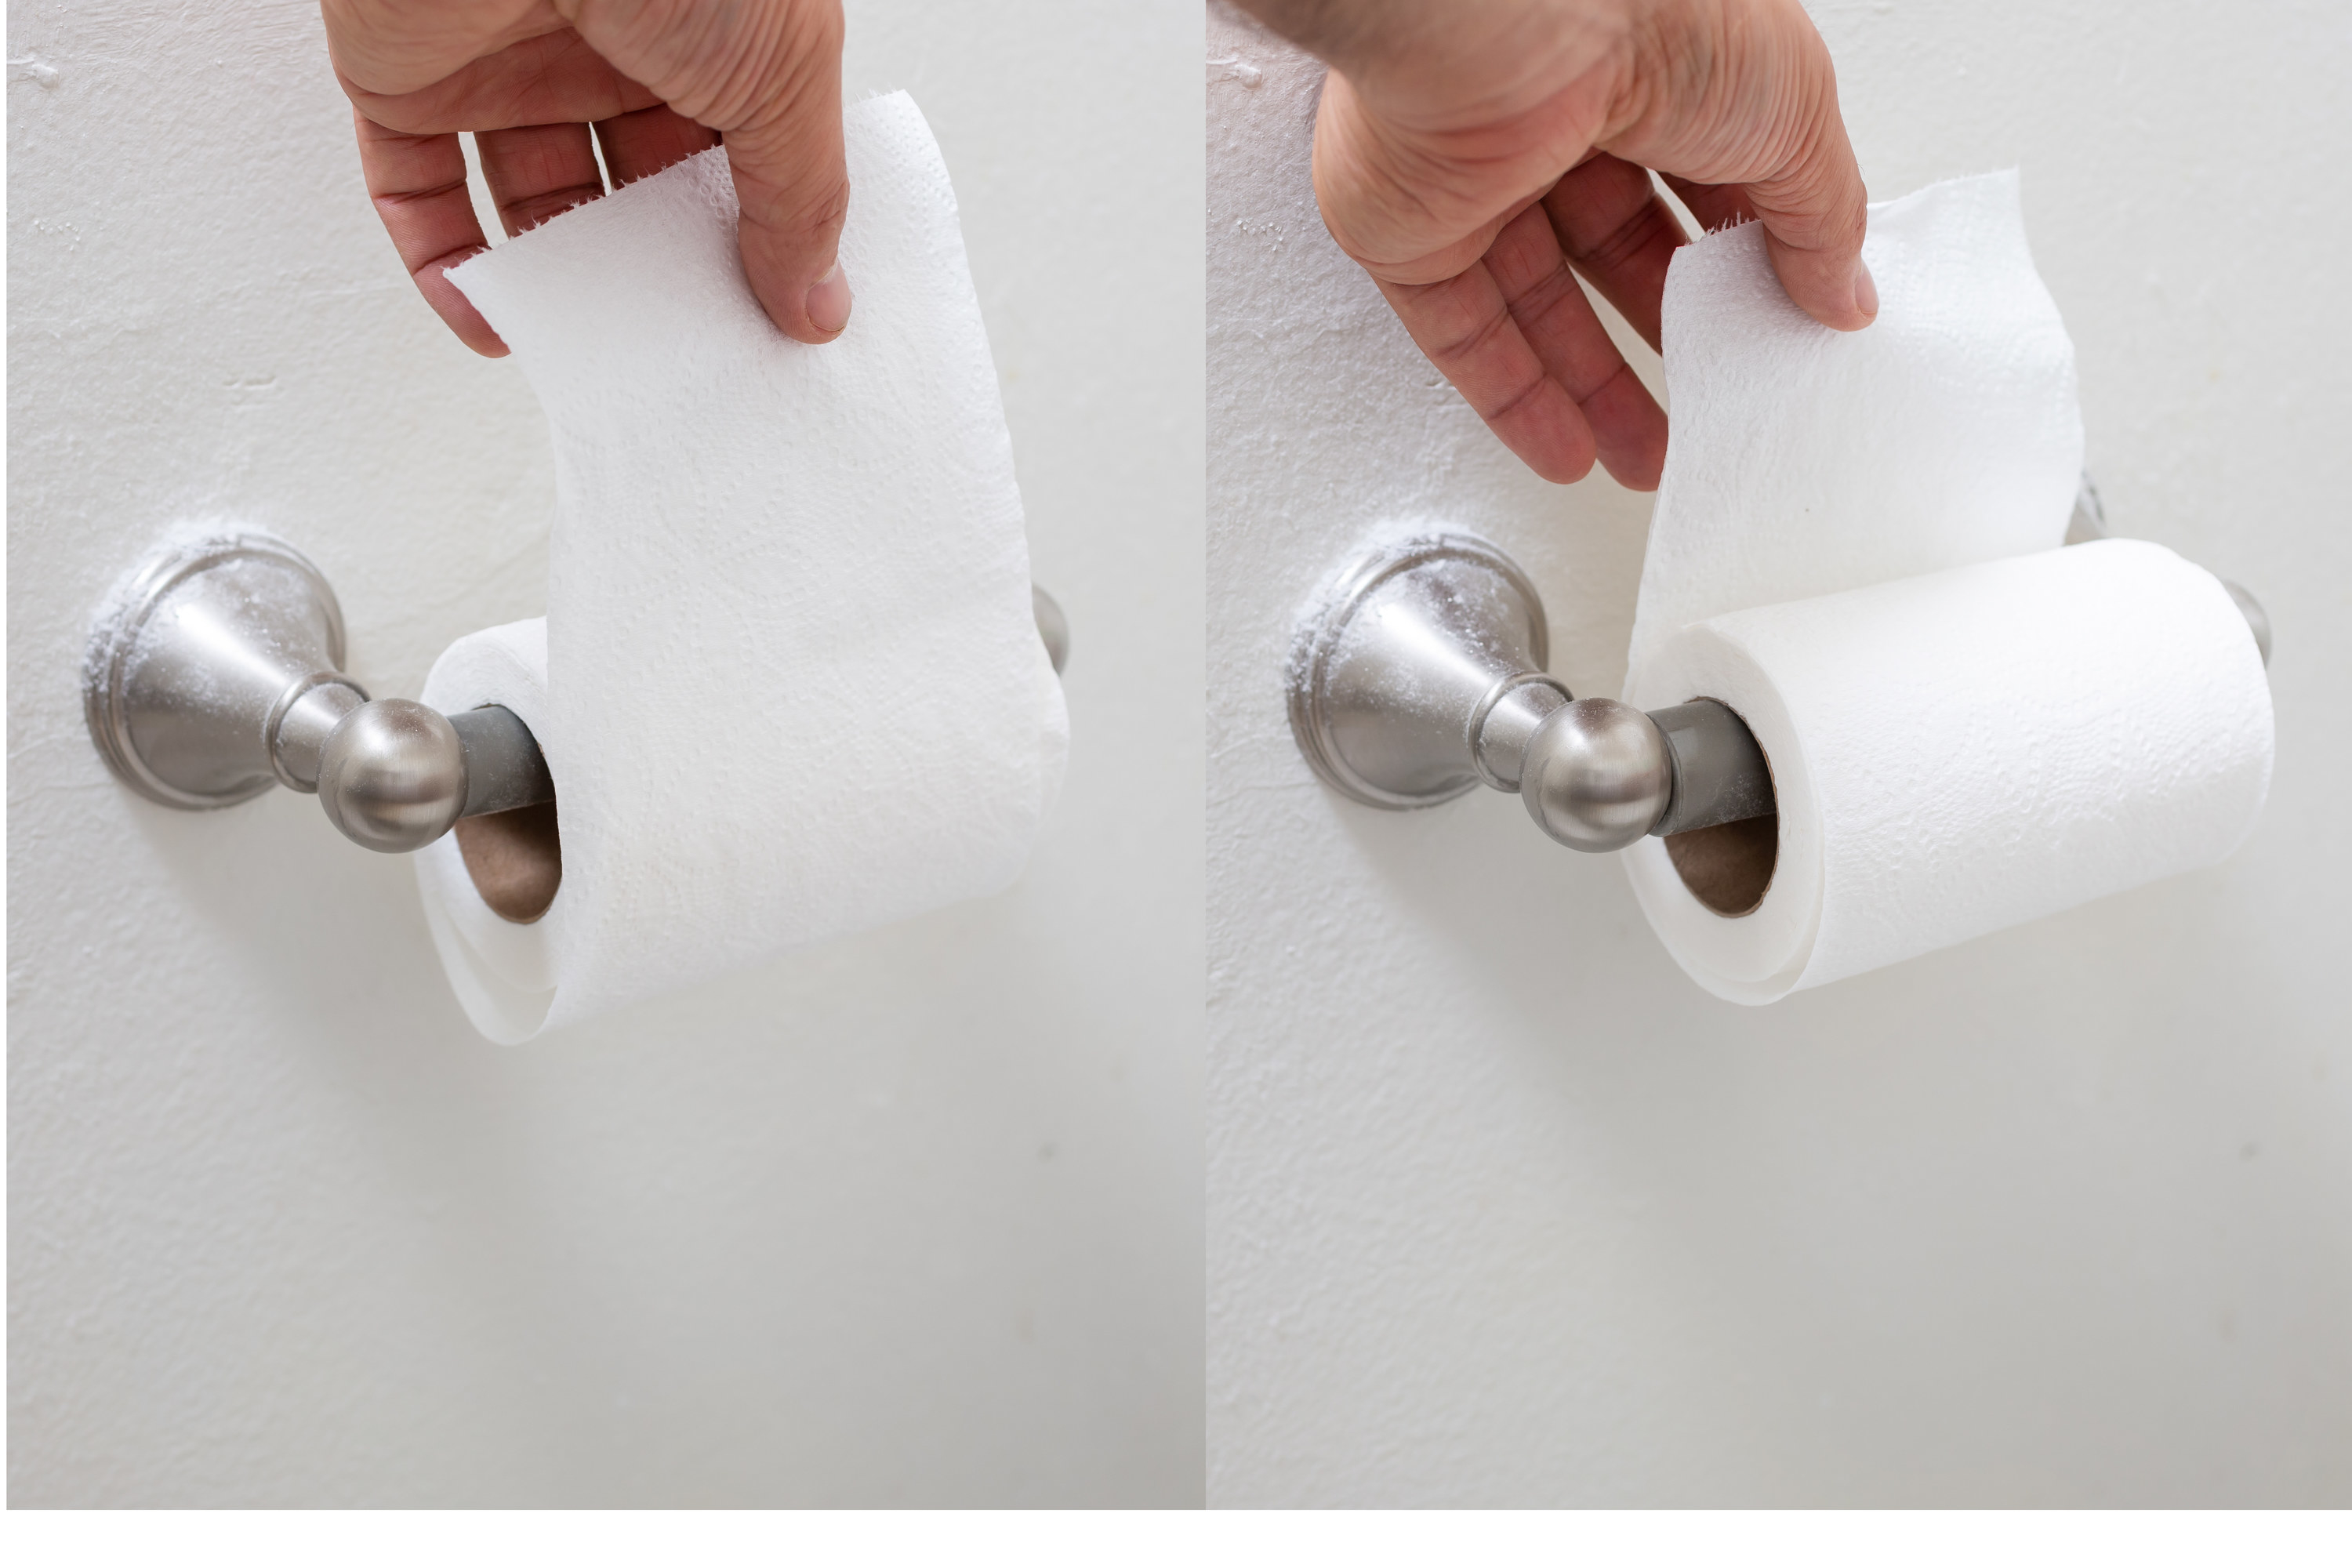 A toilet roll being pulled from the top and another from the bottom